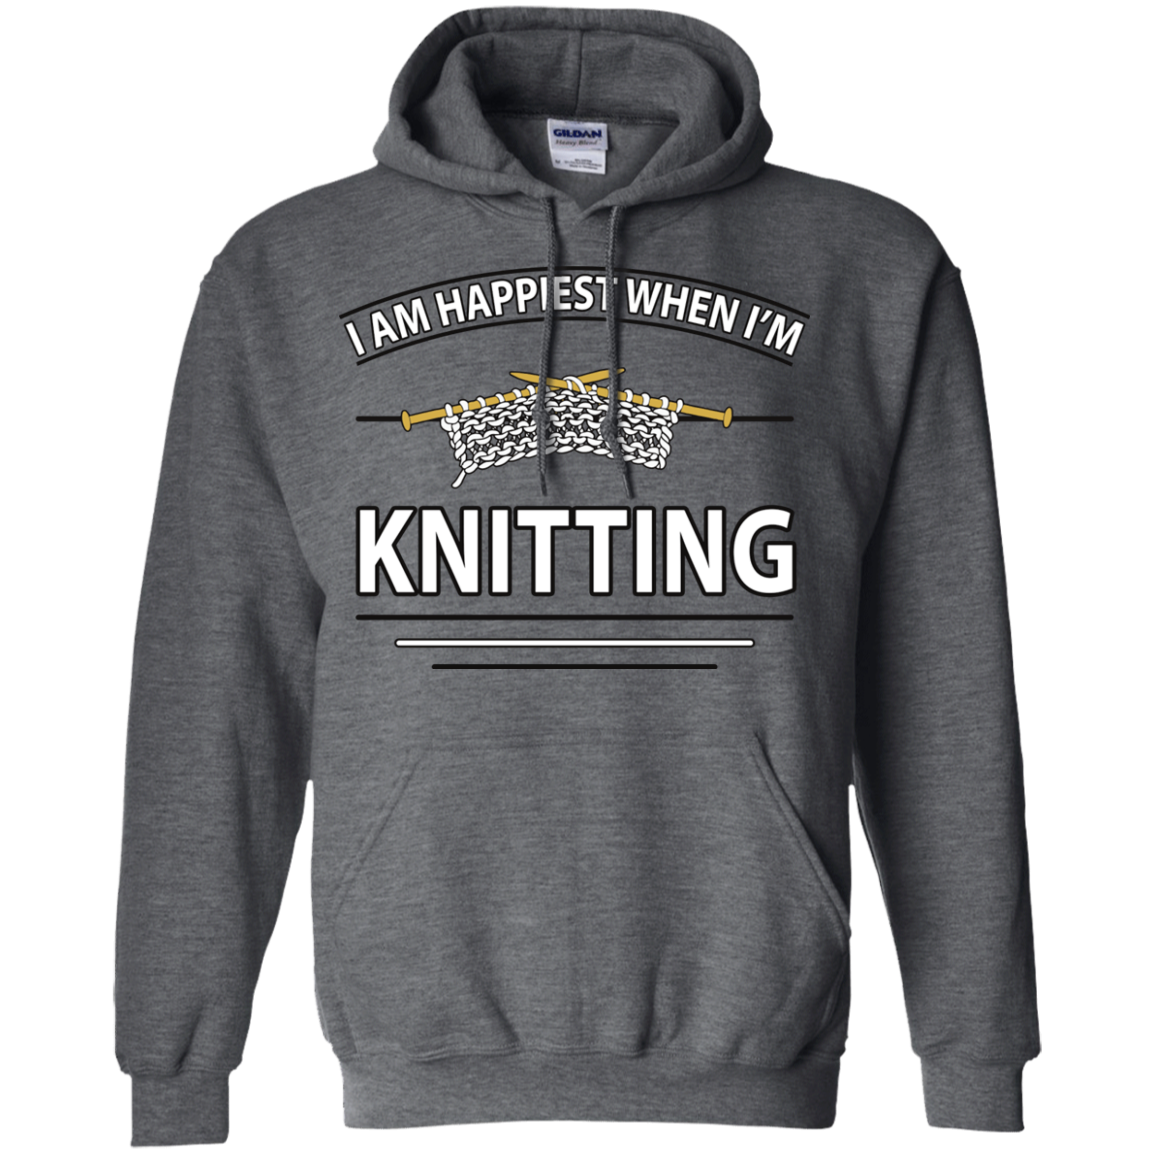 I Am Happiest When I'm Knitting Pullover Hoodies - Crafter4Life - 2